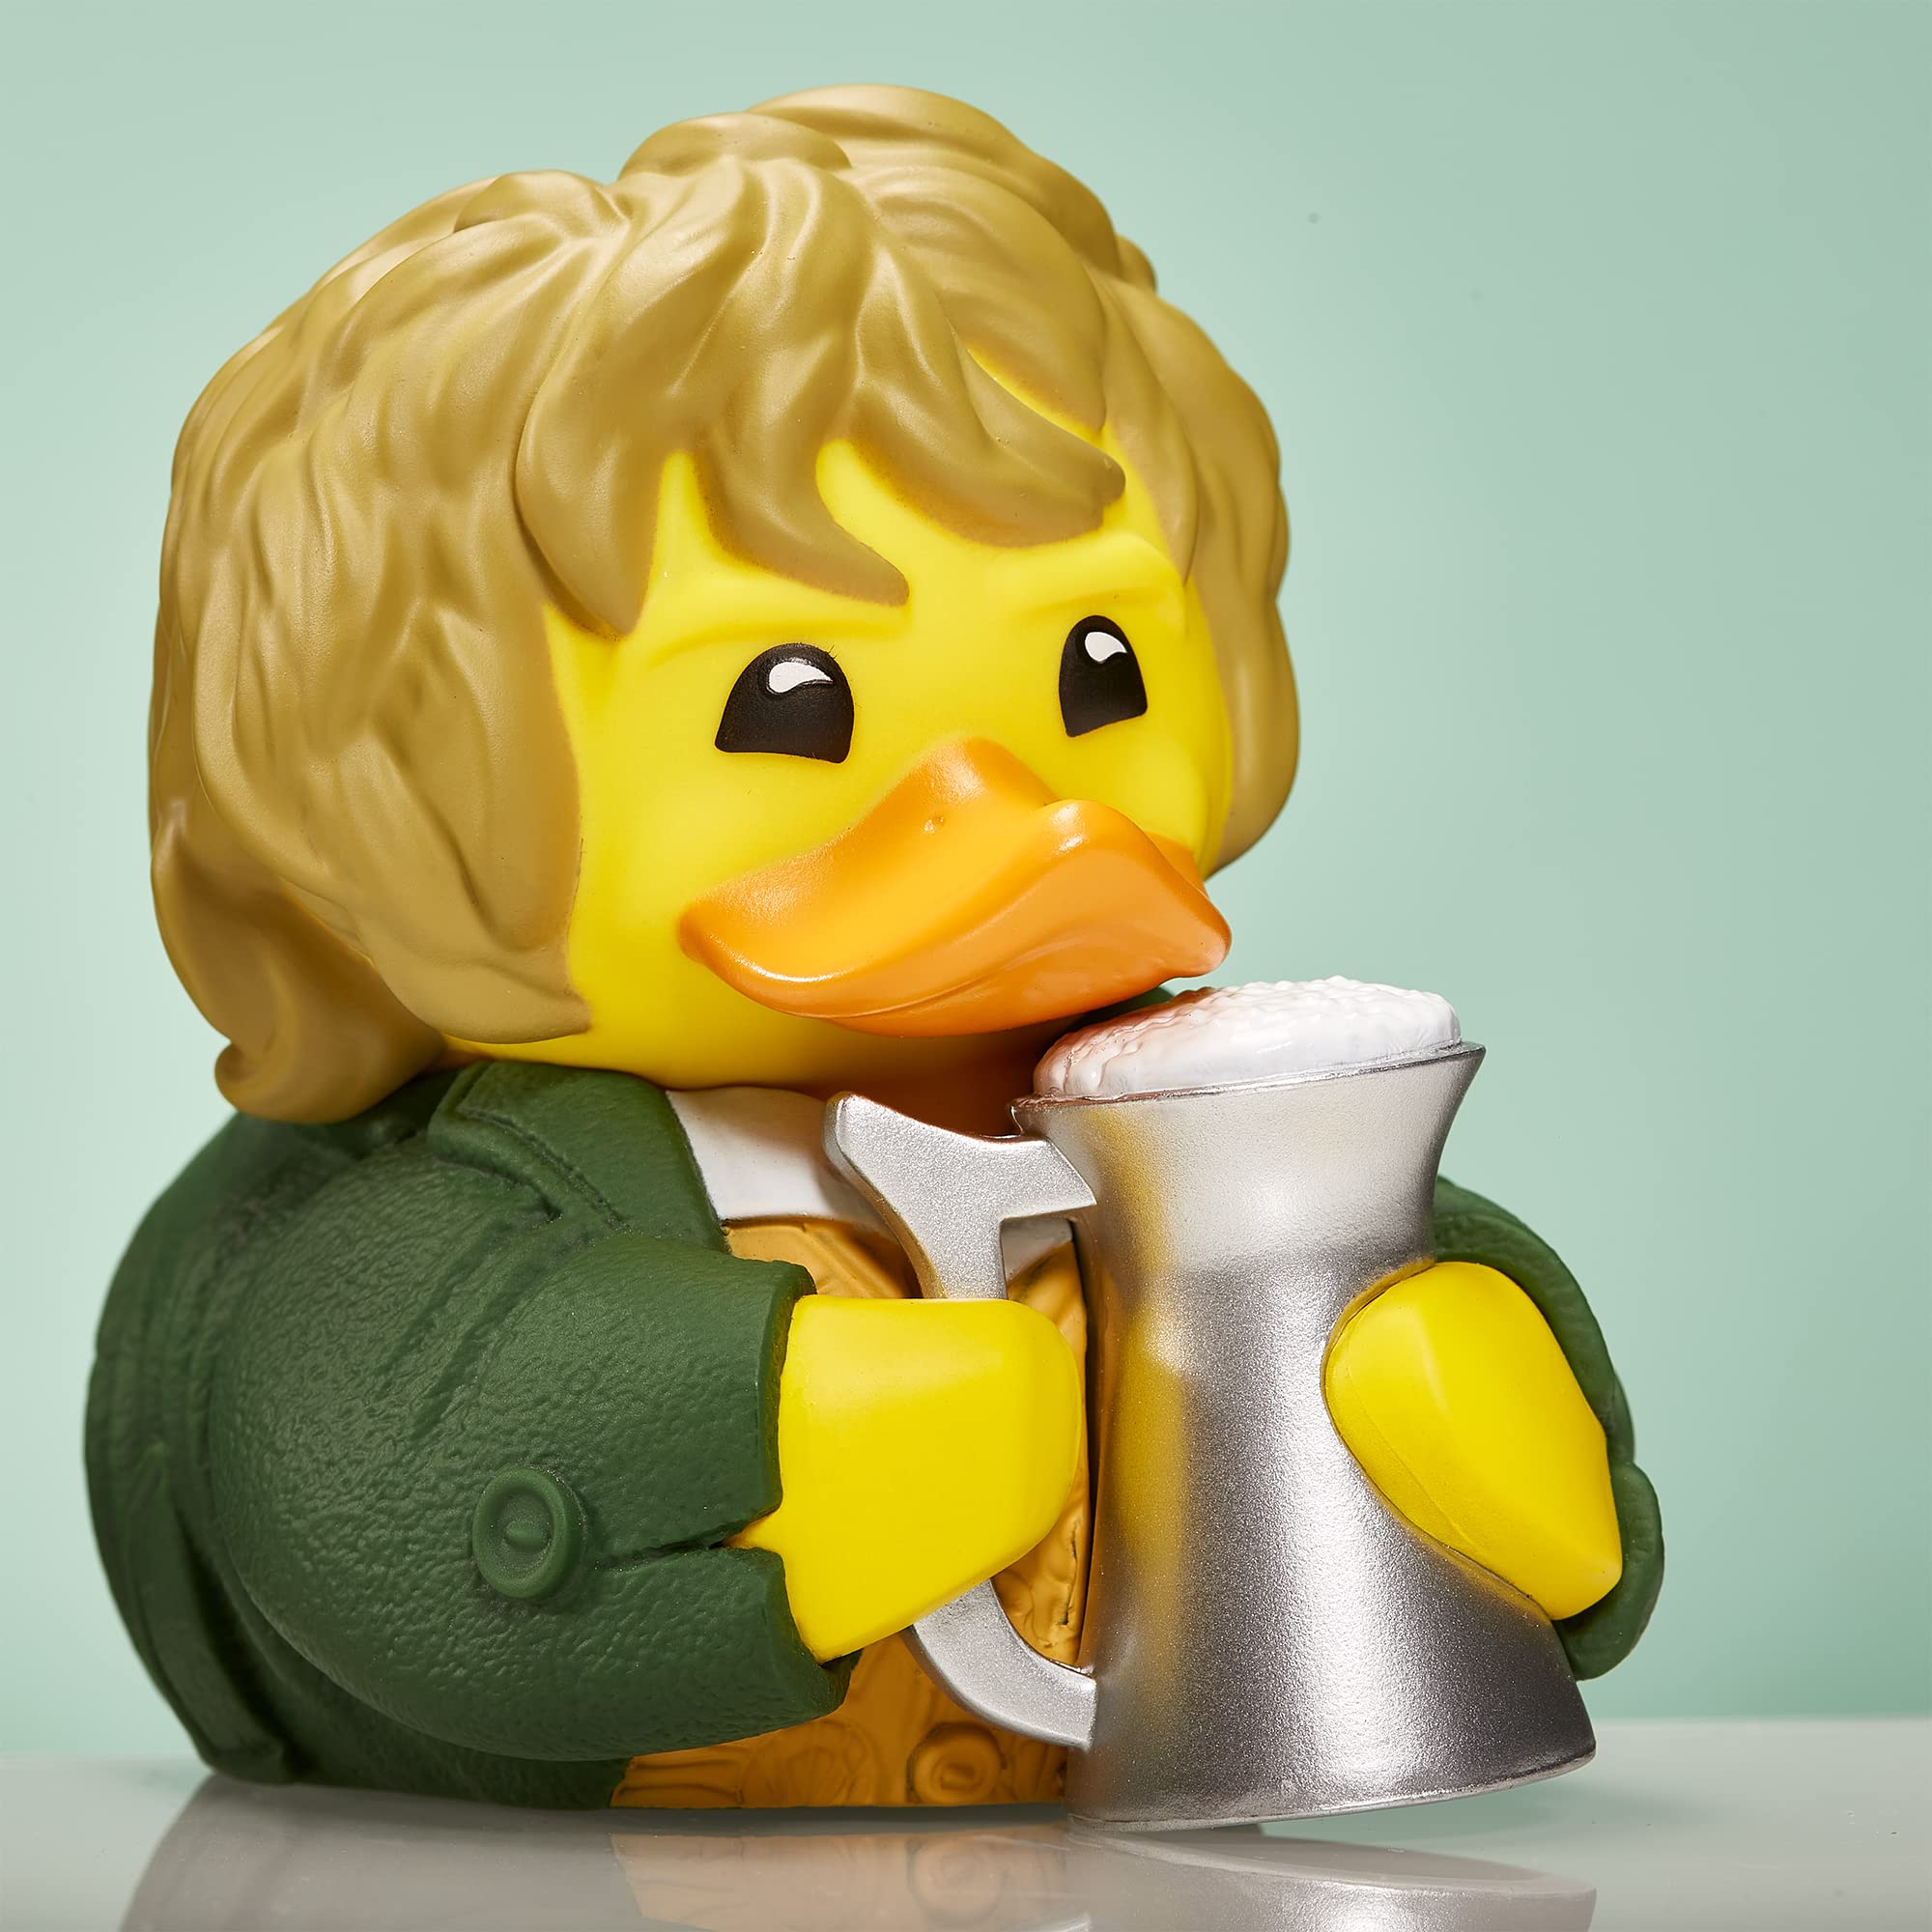 TUBBZ Lord of The Rings Merry Brandybuck Collectable Duck Vinyl Figure - Official Lord of The Rings Merchandise - TV, Movies & Video Games